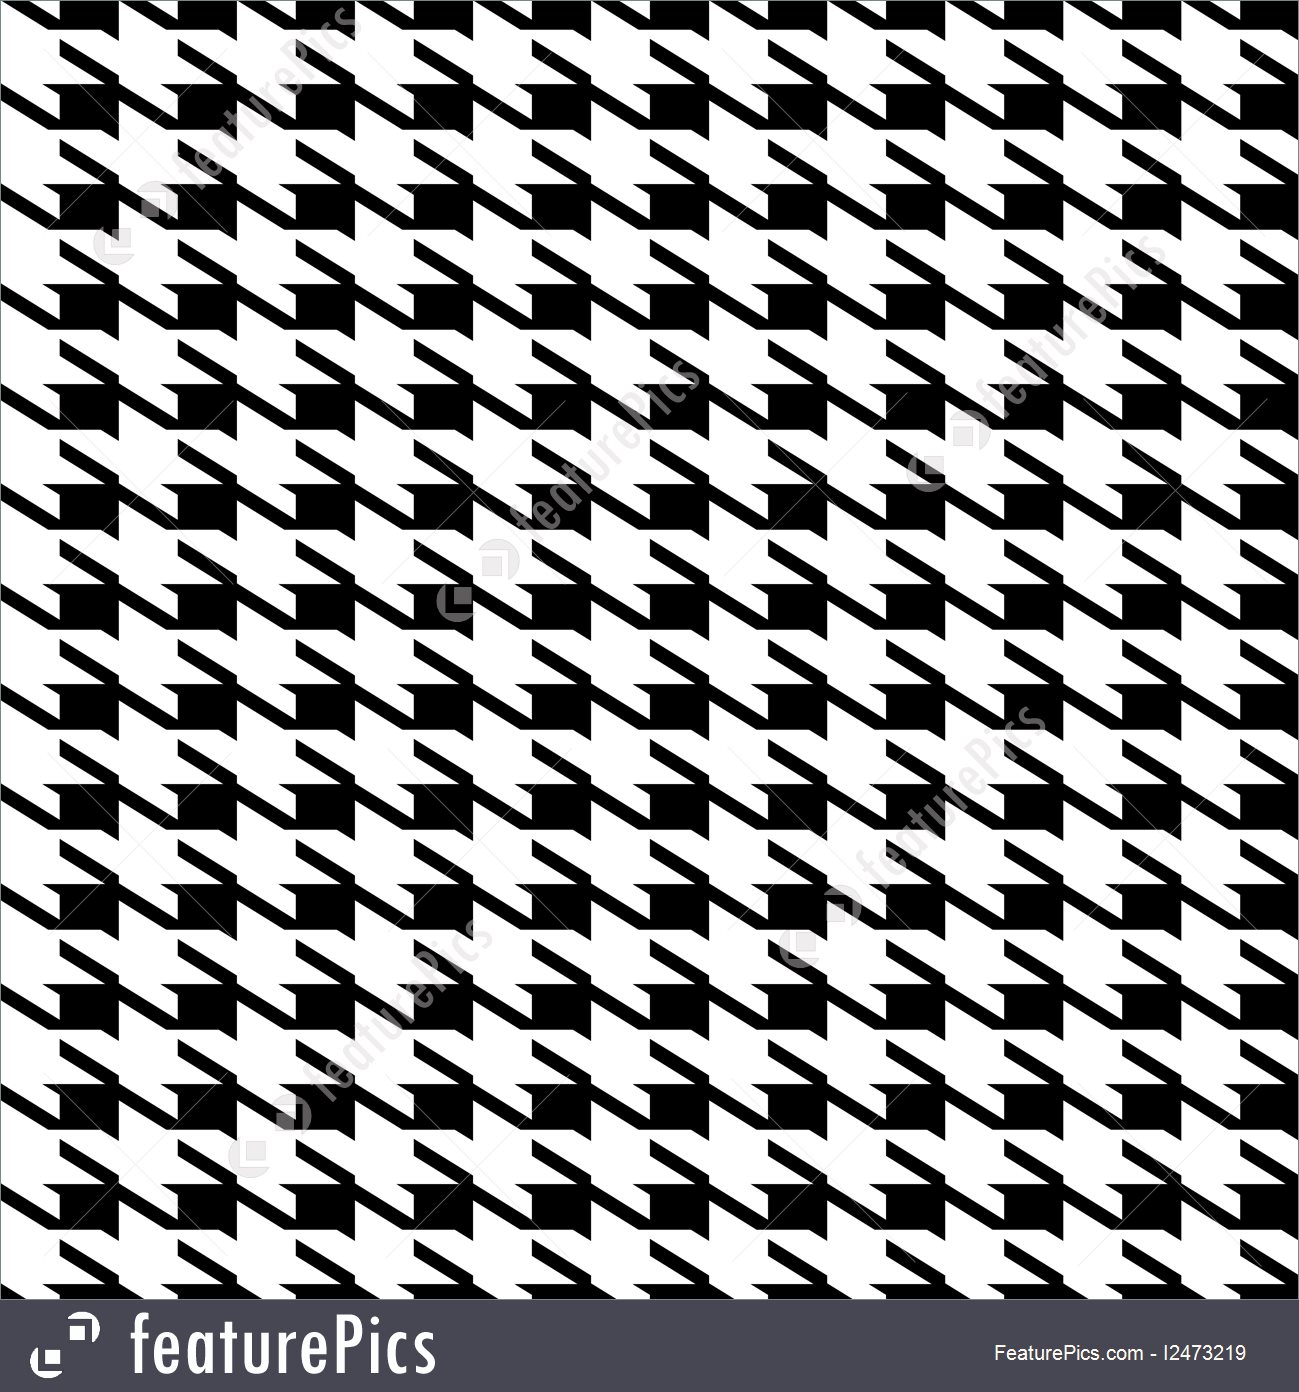 Houndstooth Seamless Background